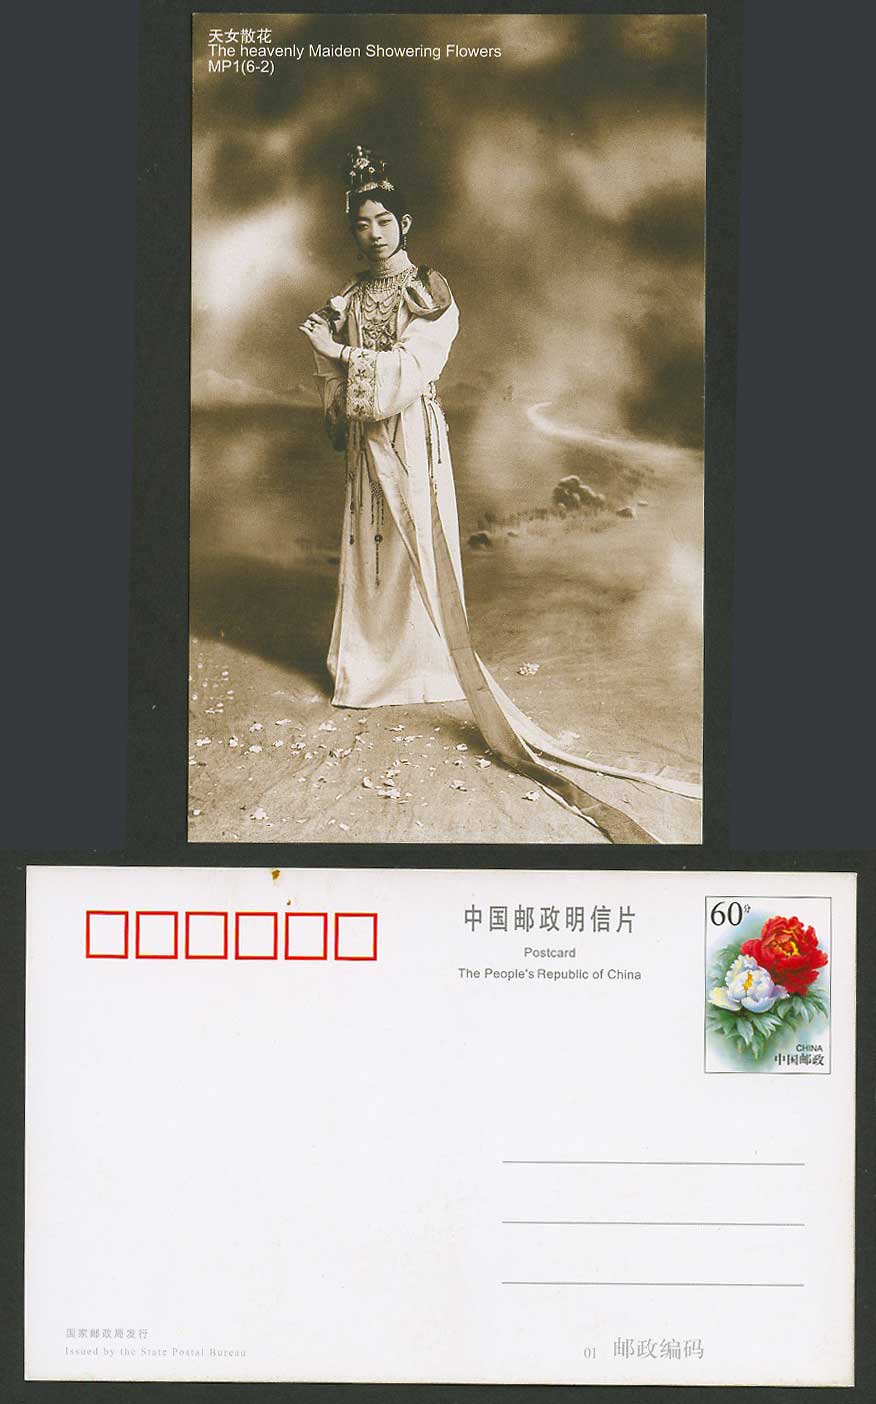 China 60c Postal Stationery Postcard 1917 Mei Lanfang as Heavenly Maiden 梅蘭芳飾天女